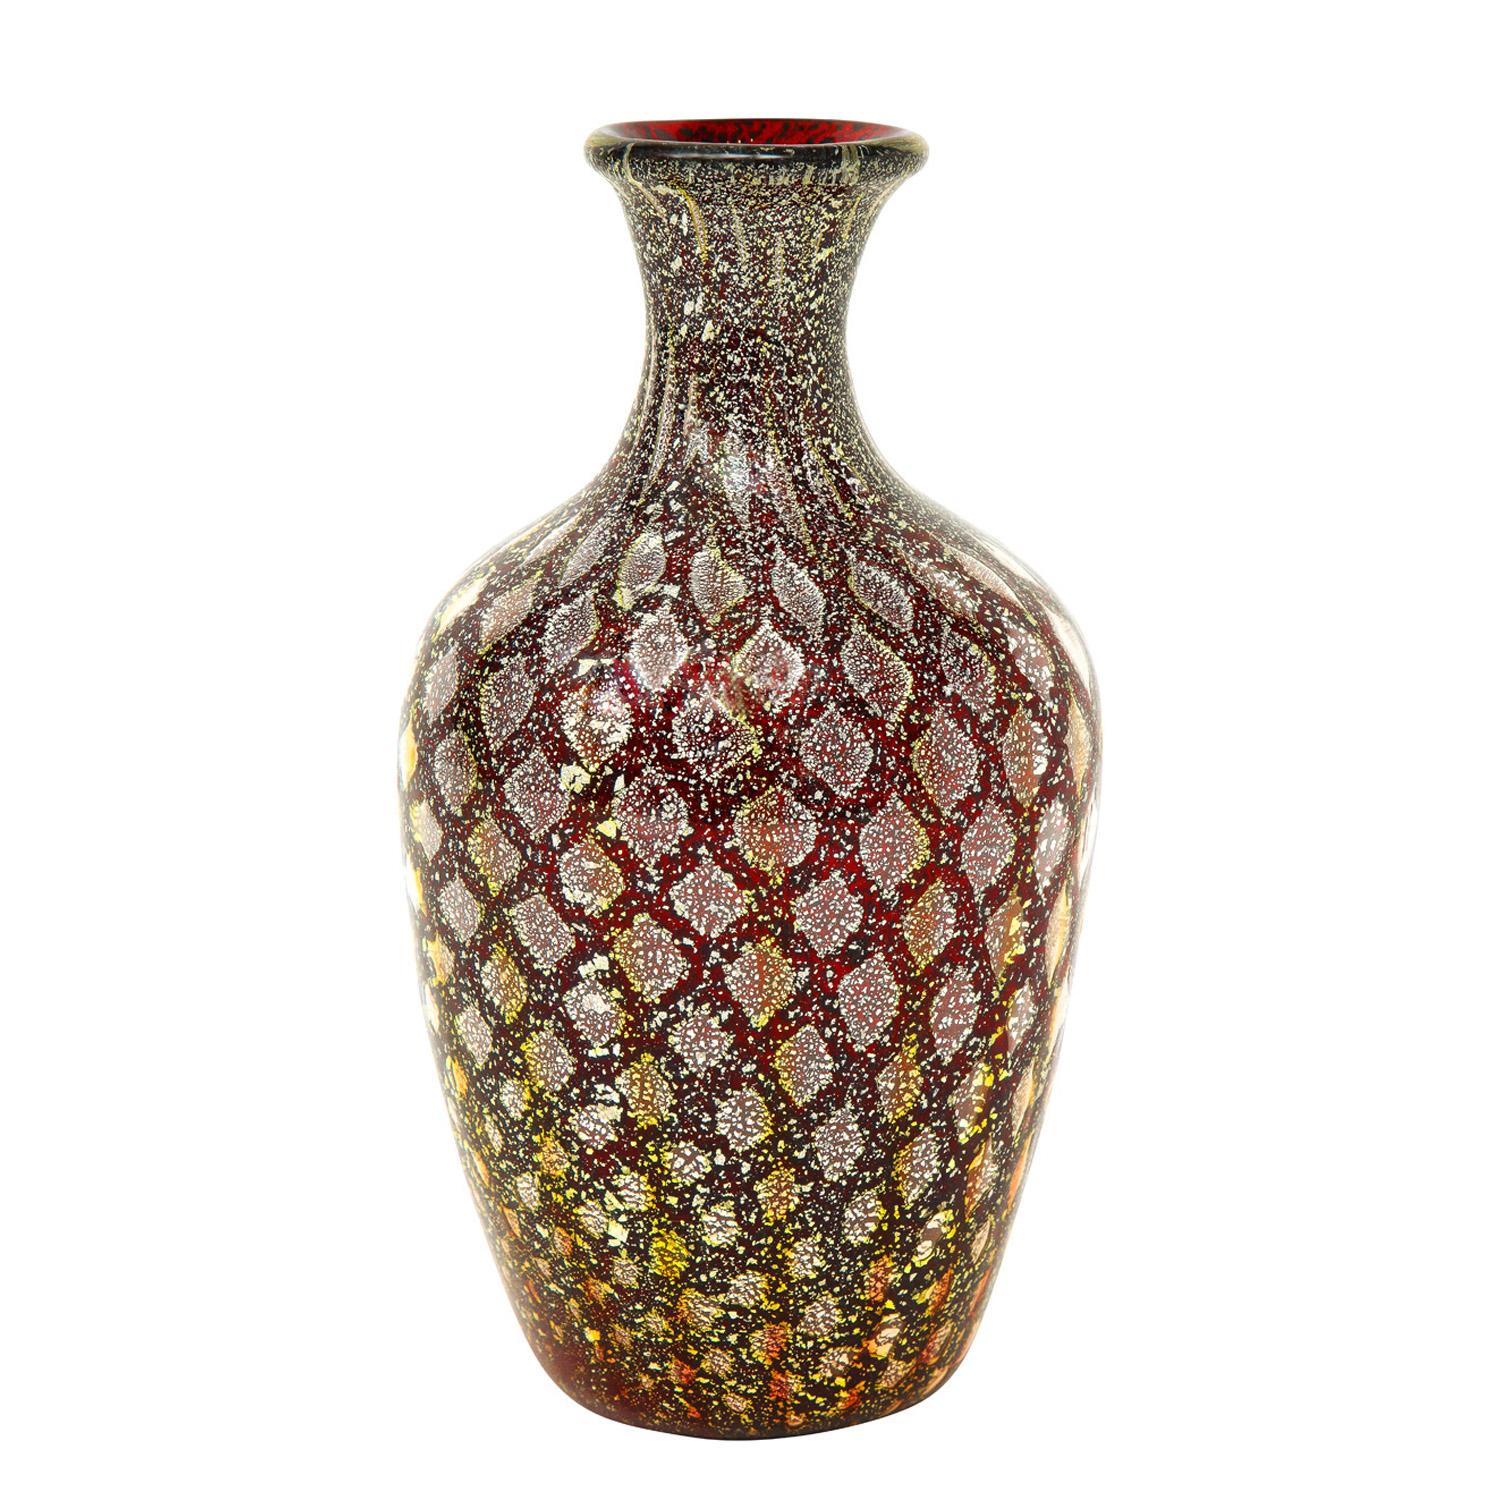 Hand-blown red glass vase with gold foil from the Reazione Policrome Series, Balloton, by Giulio Radi for Arte Vetraria Muranese or A.V.E.M., Murano Italy, ca 1950. This vase is exquisite like a jewel.

Reference:
AVEM Artistic Production